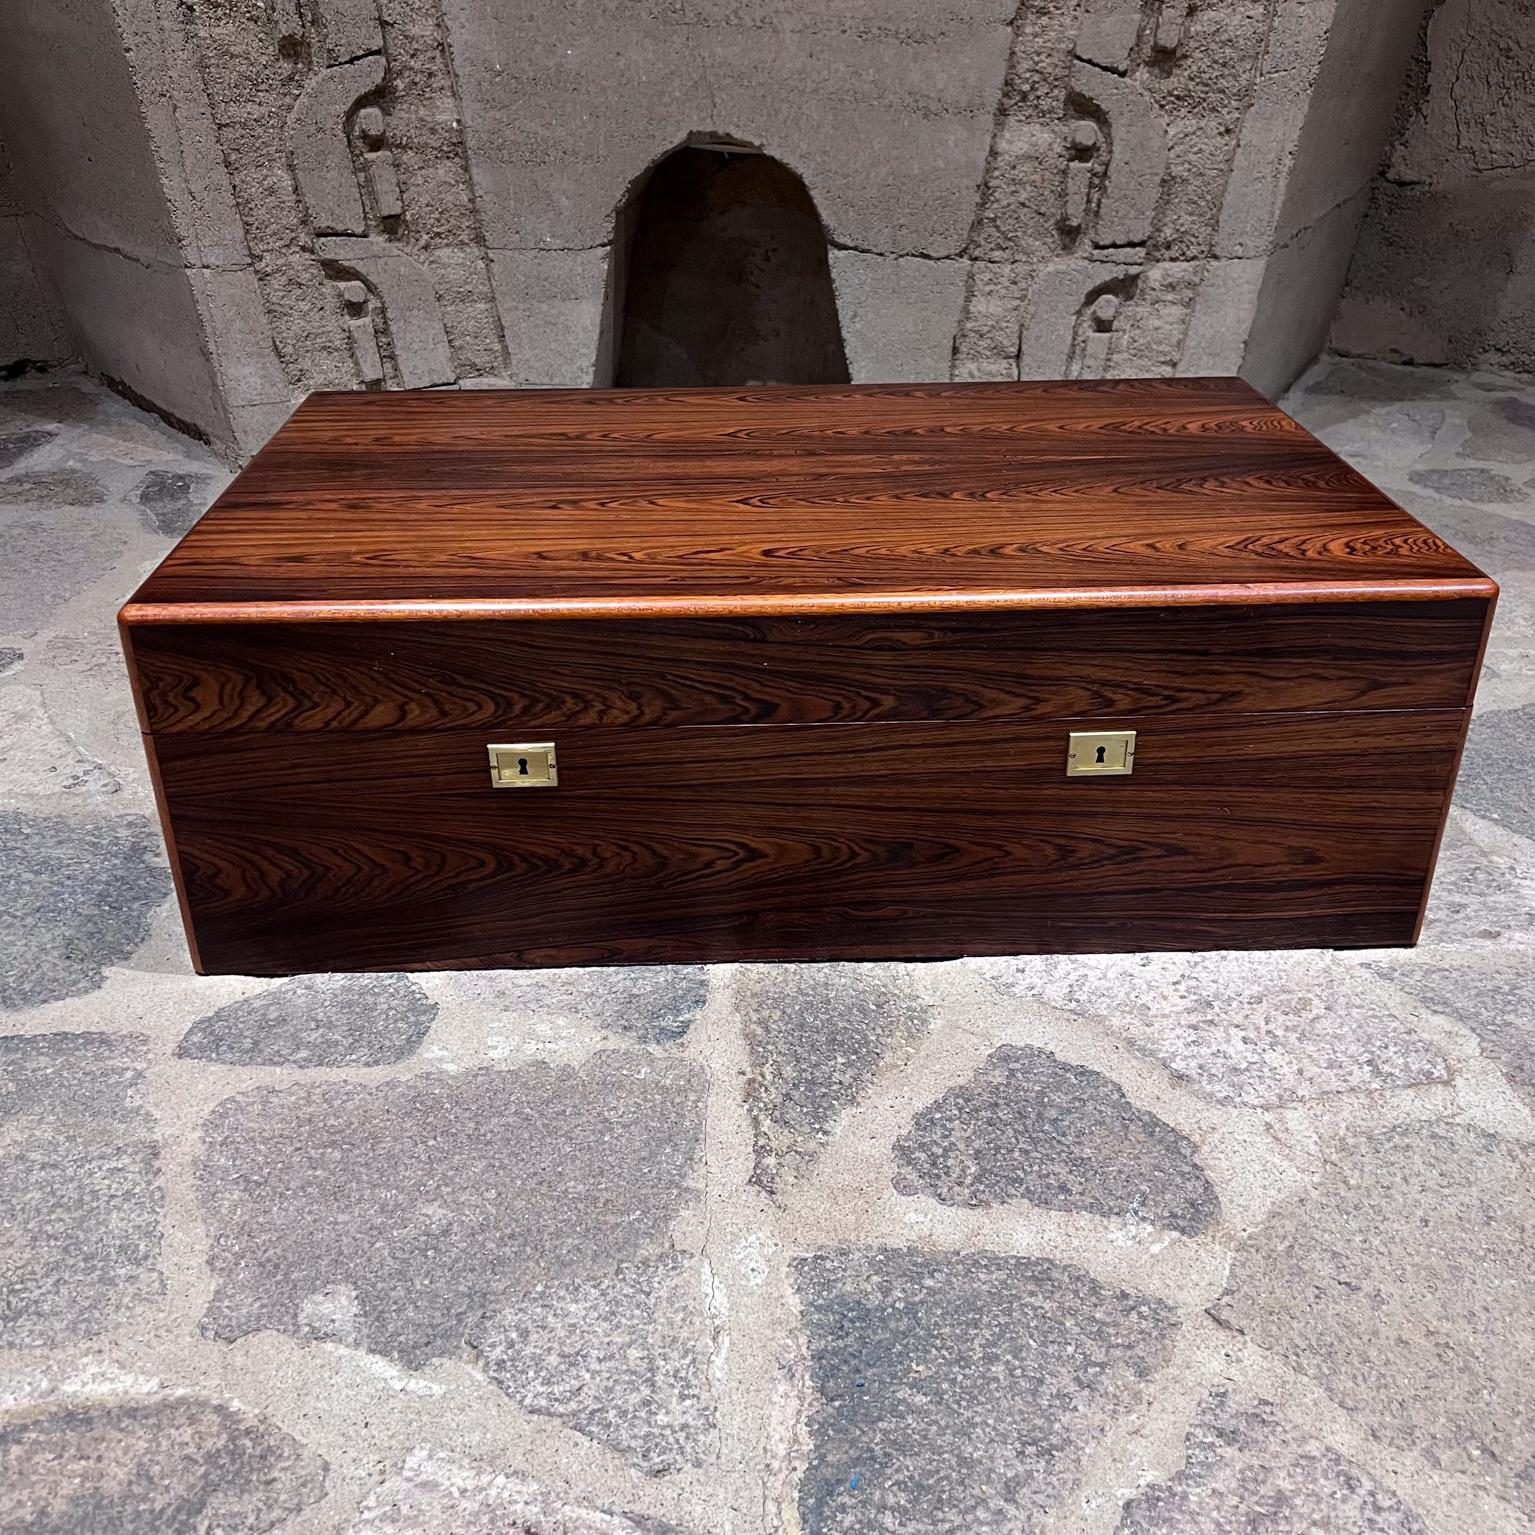 1970s Extra Large Rosewood Cigar Humidor Box
Campaign Brass Handles
made by Davidoff Switzerland
Luxurious Swiss design
10 h x 19.75 d x 31.5 w
Signature on handles.
Brass has patina.
Original vintage restored condition.
See all images provided